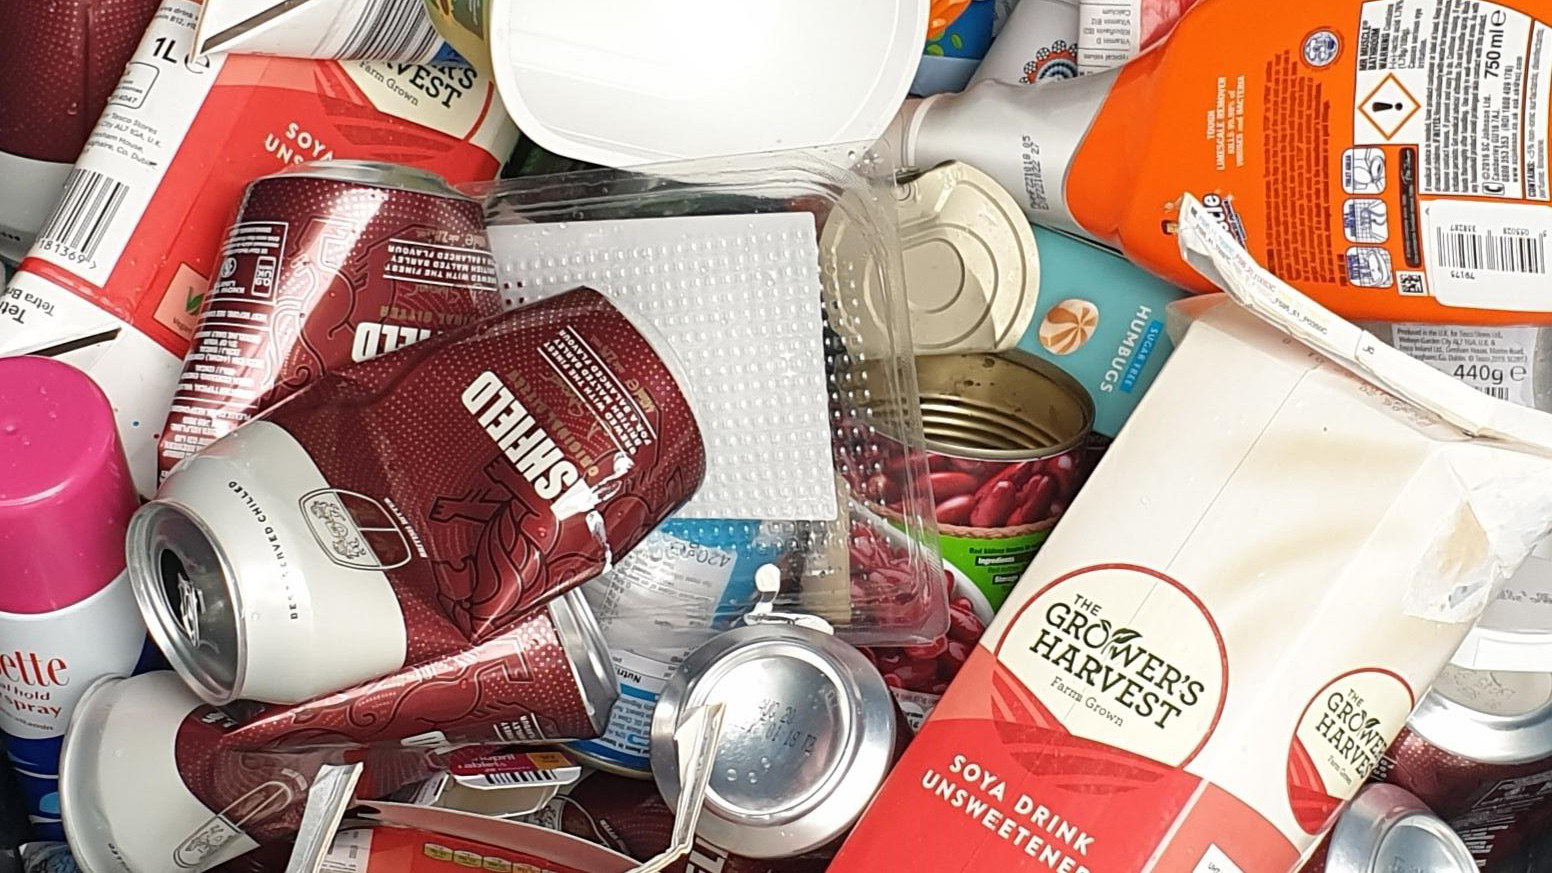 A pile of recyclable materials, such as cartons, tins, cans and white plastic tubs.